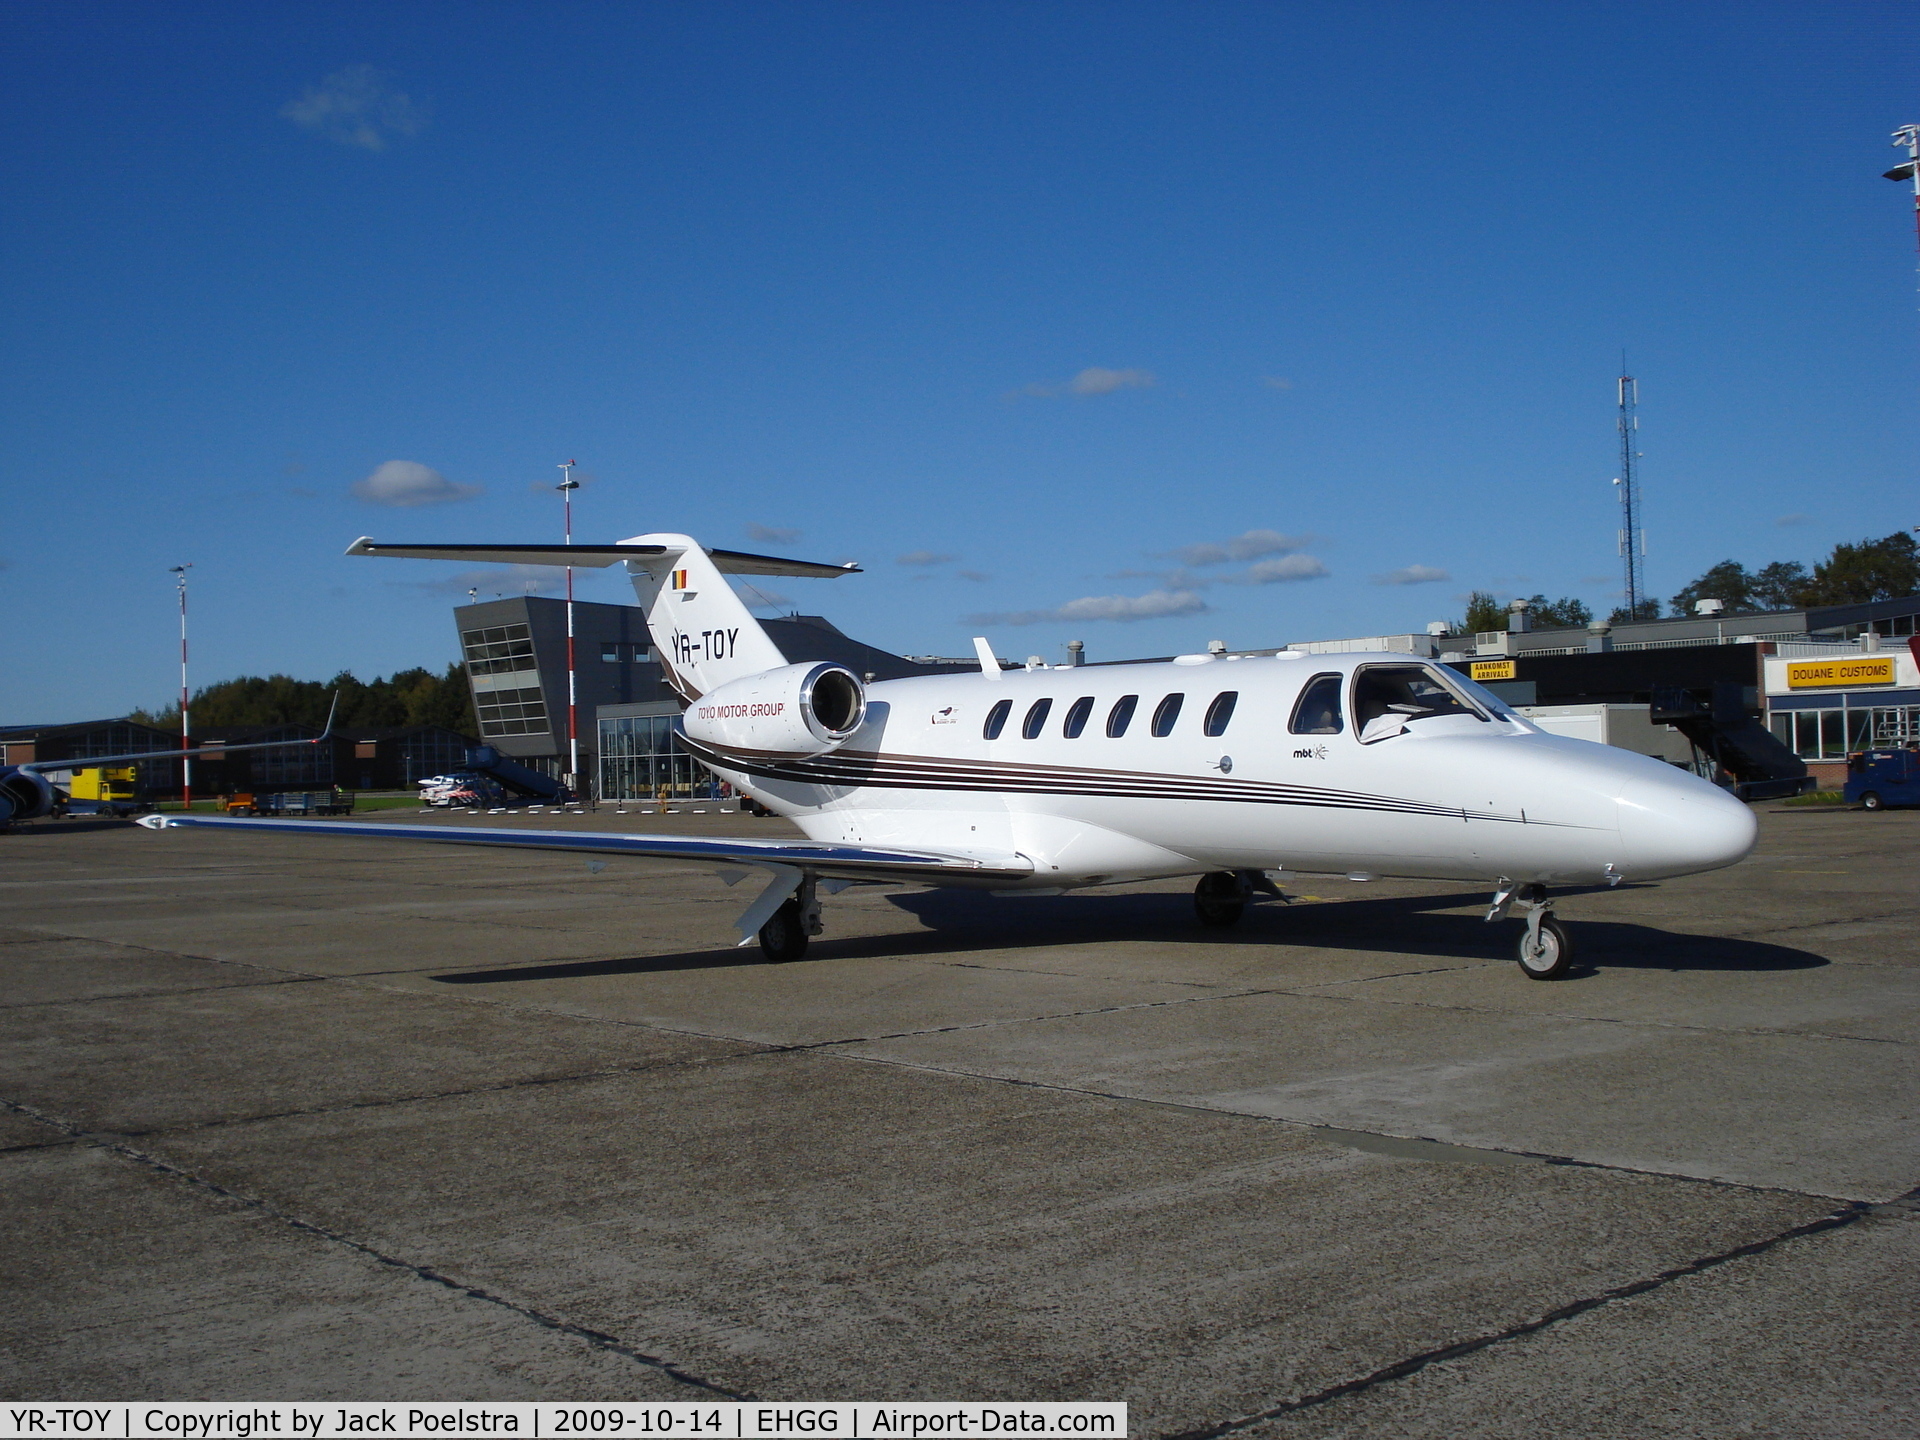 YR-TOY, Cessna 525 Citation Jet C/N 525a-0455, at Groningen airport